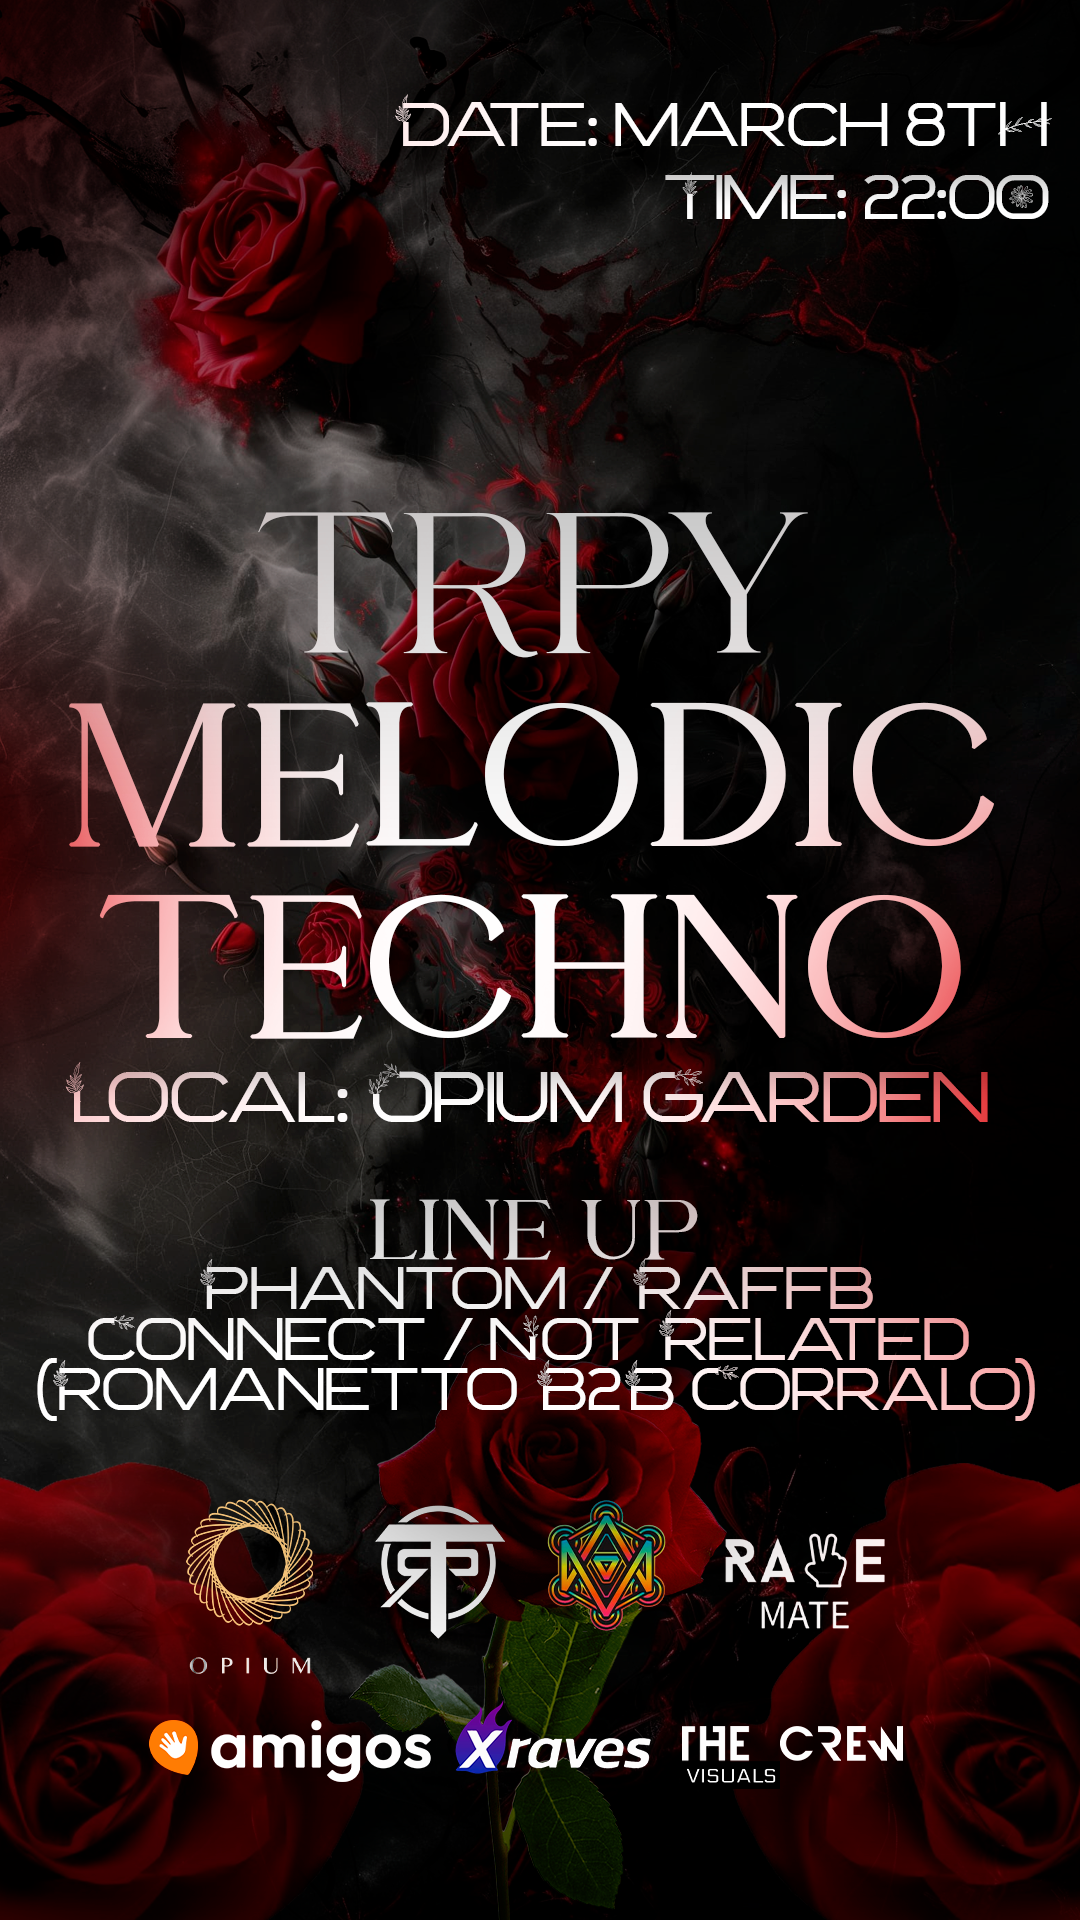 TRPY Melodic Techno - Opium Garden - by TRP - フライヤー表